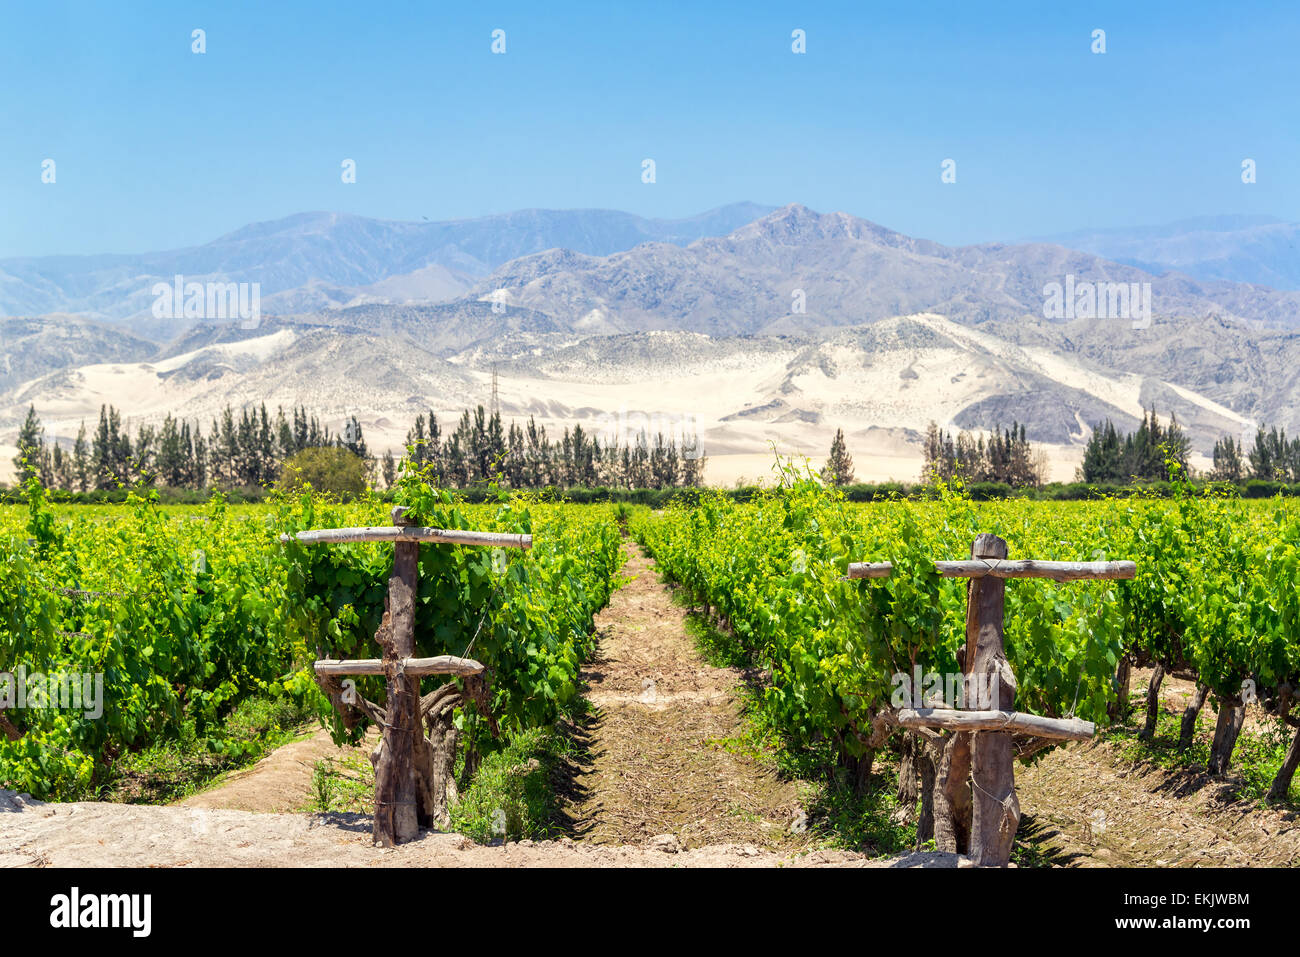 Lush green vineyard for the production of pisco in Ica, Peru with dry sand covered hills in the background Stock Photo